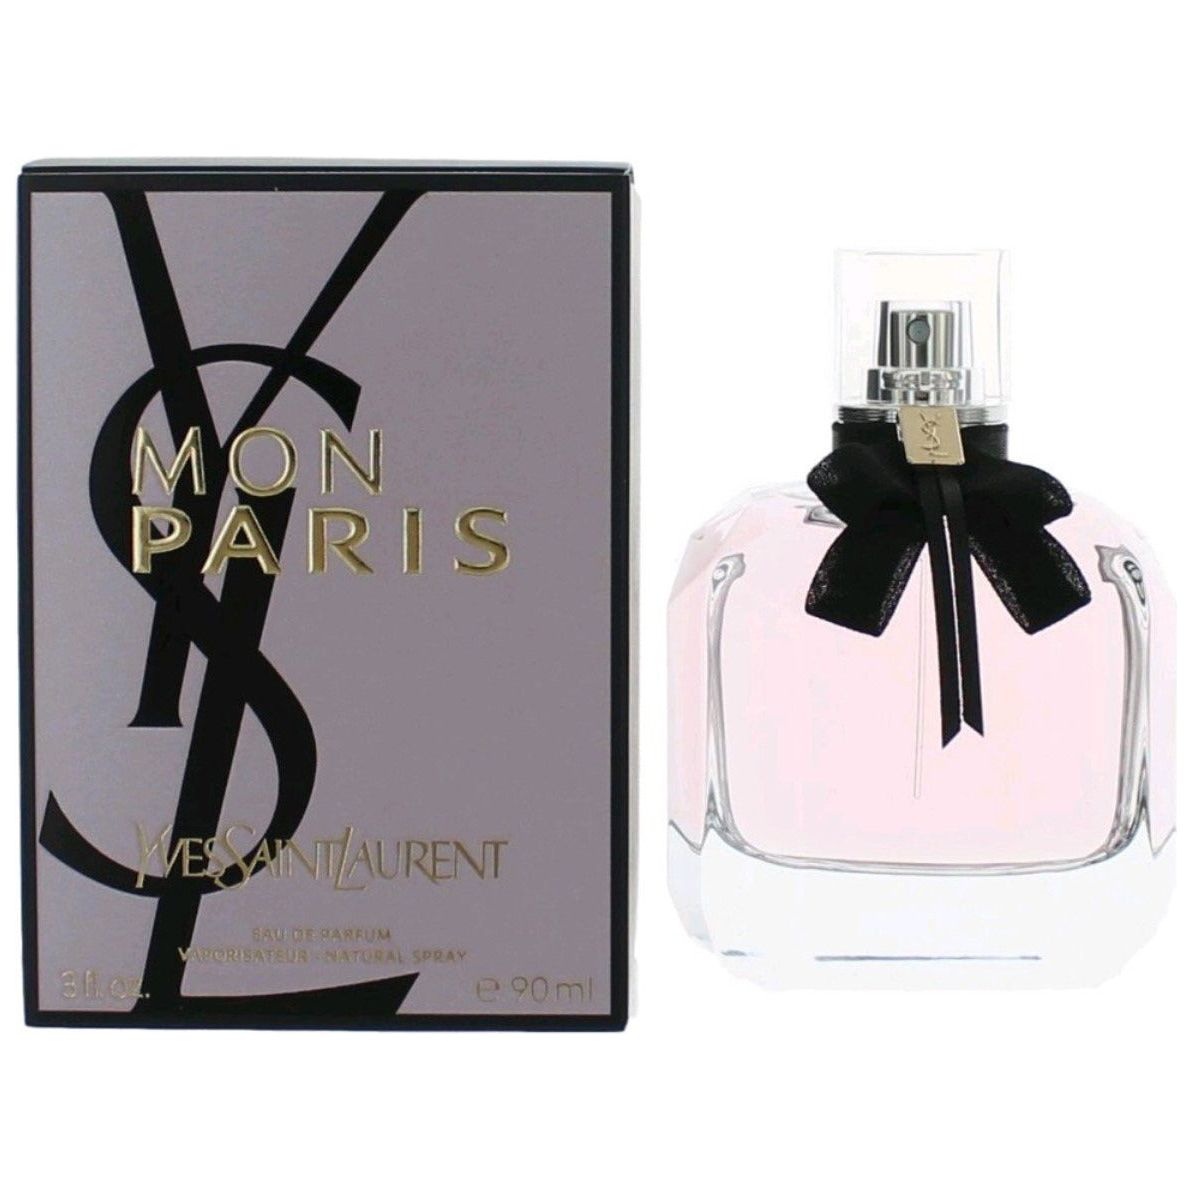 Mon Paris by Yves Saint Laurent perfume for her EDP 3.0 / 3 oz New in